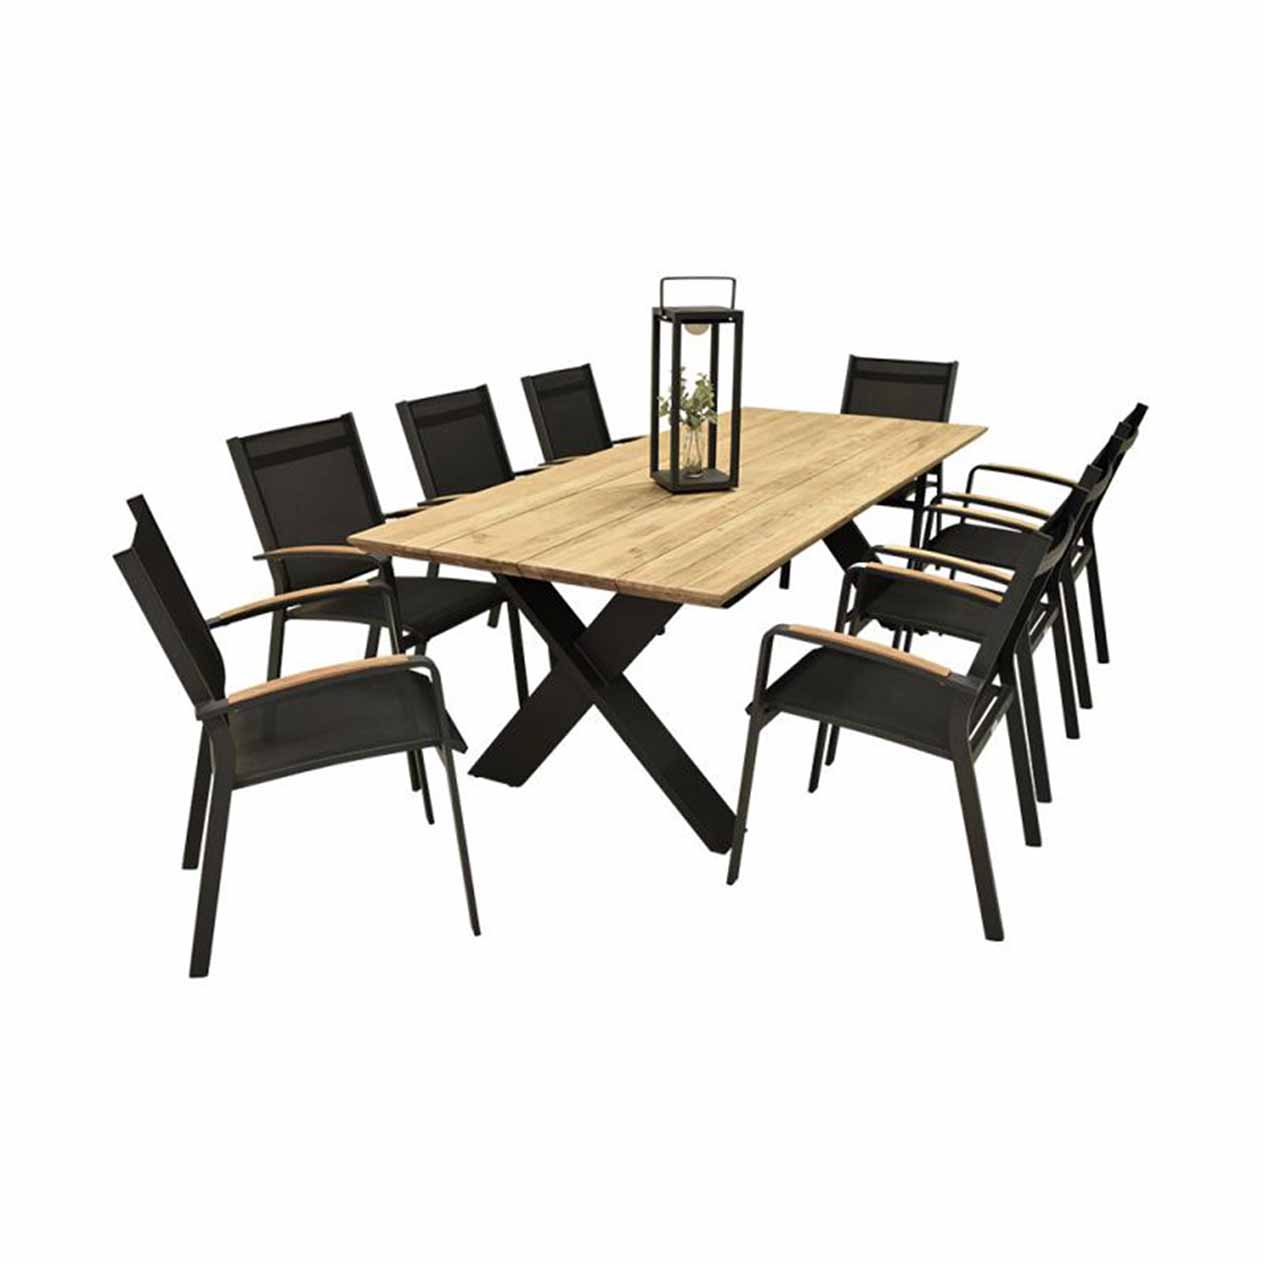 Outdoor Timber Dining Settings